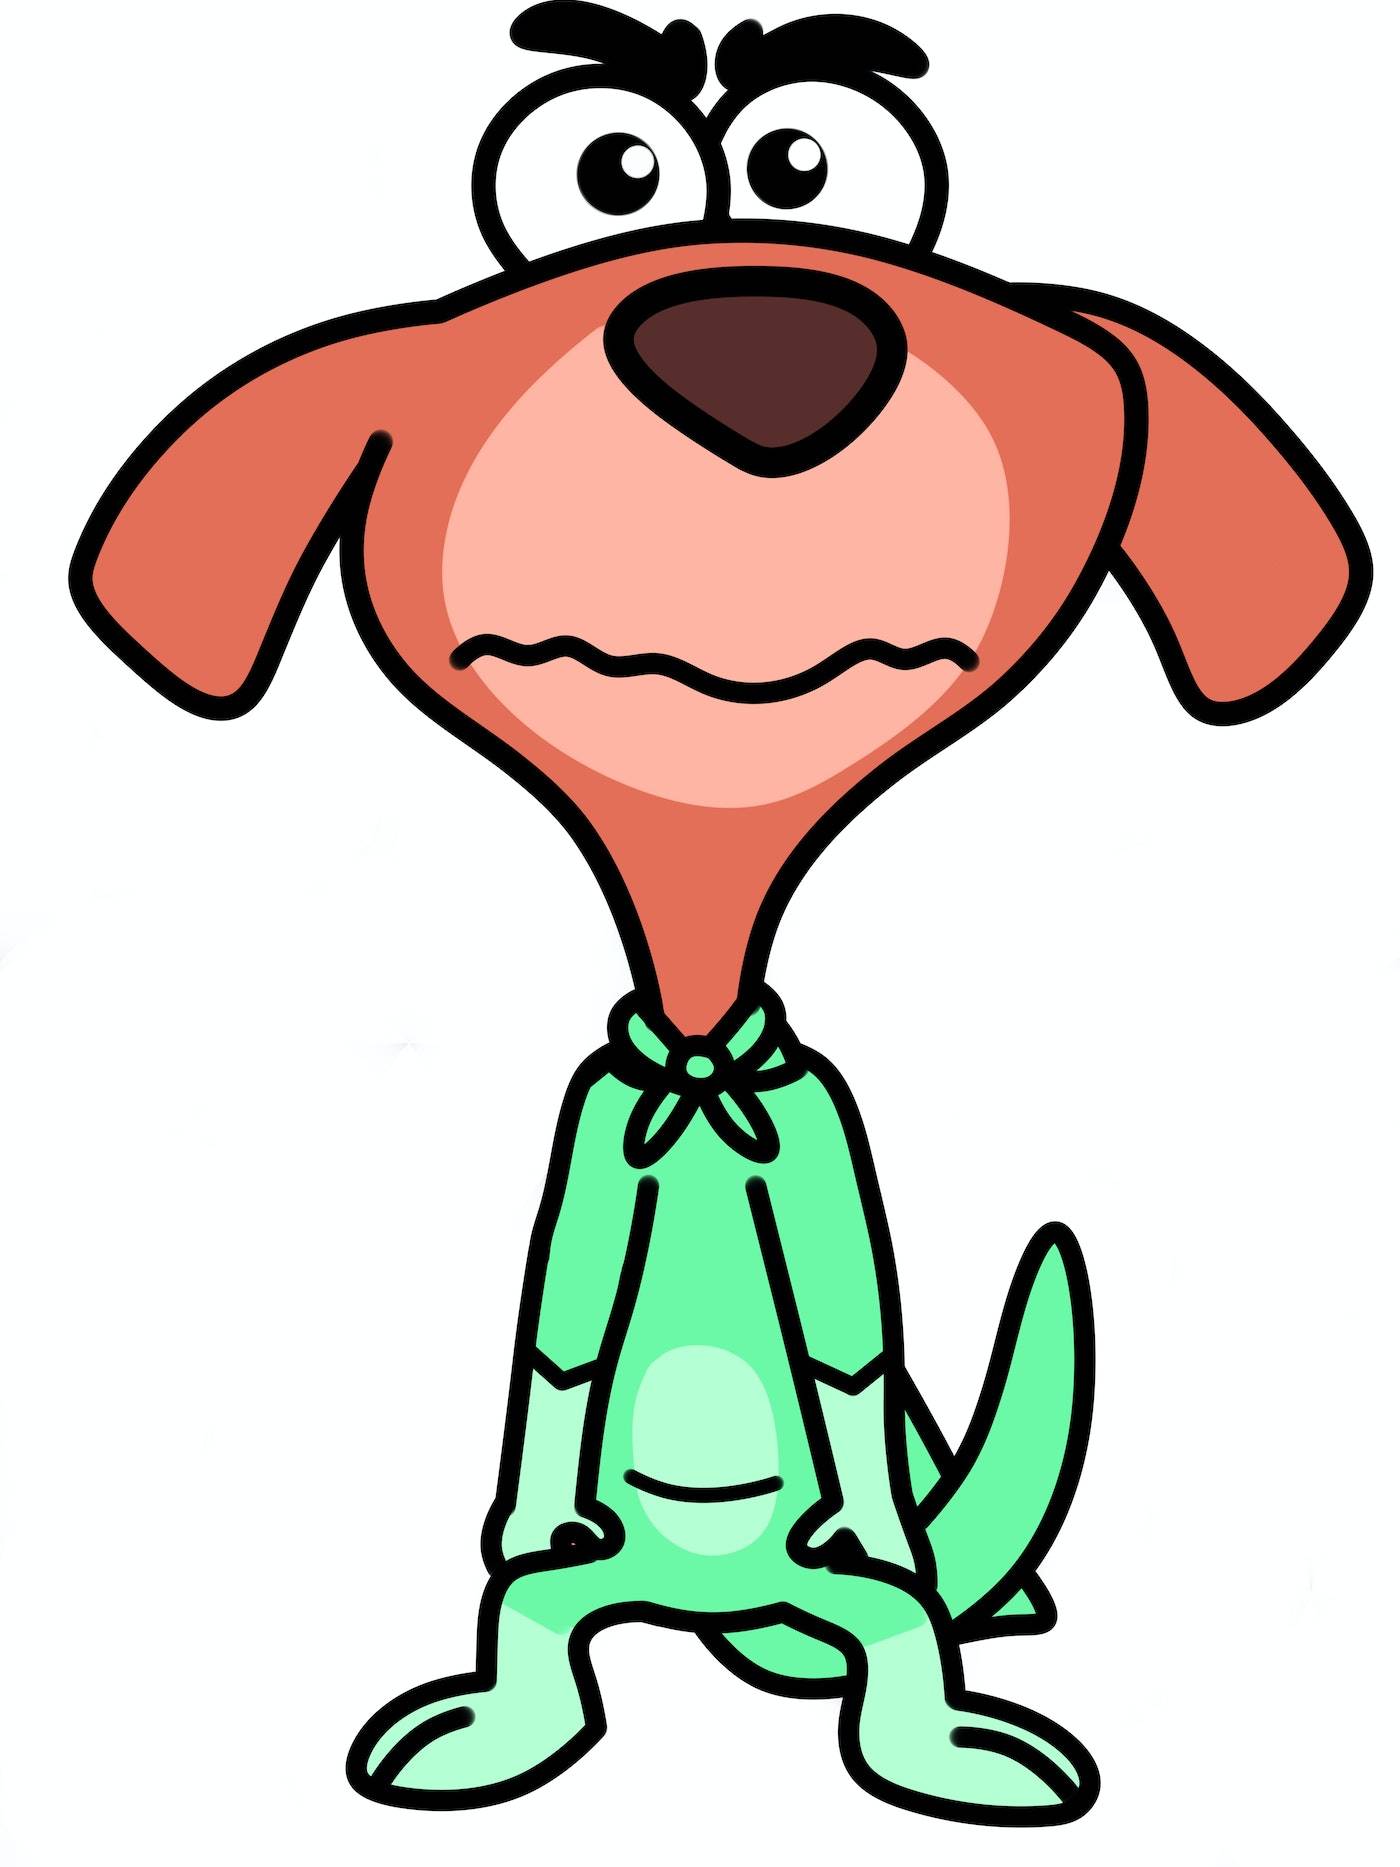 Doggy Don by Goldnation221 on DeviantArt